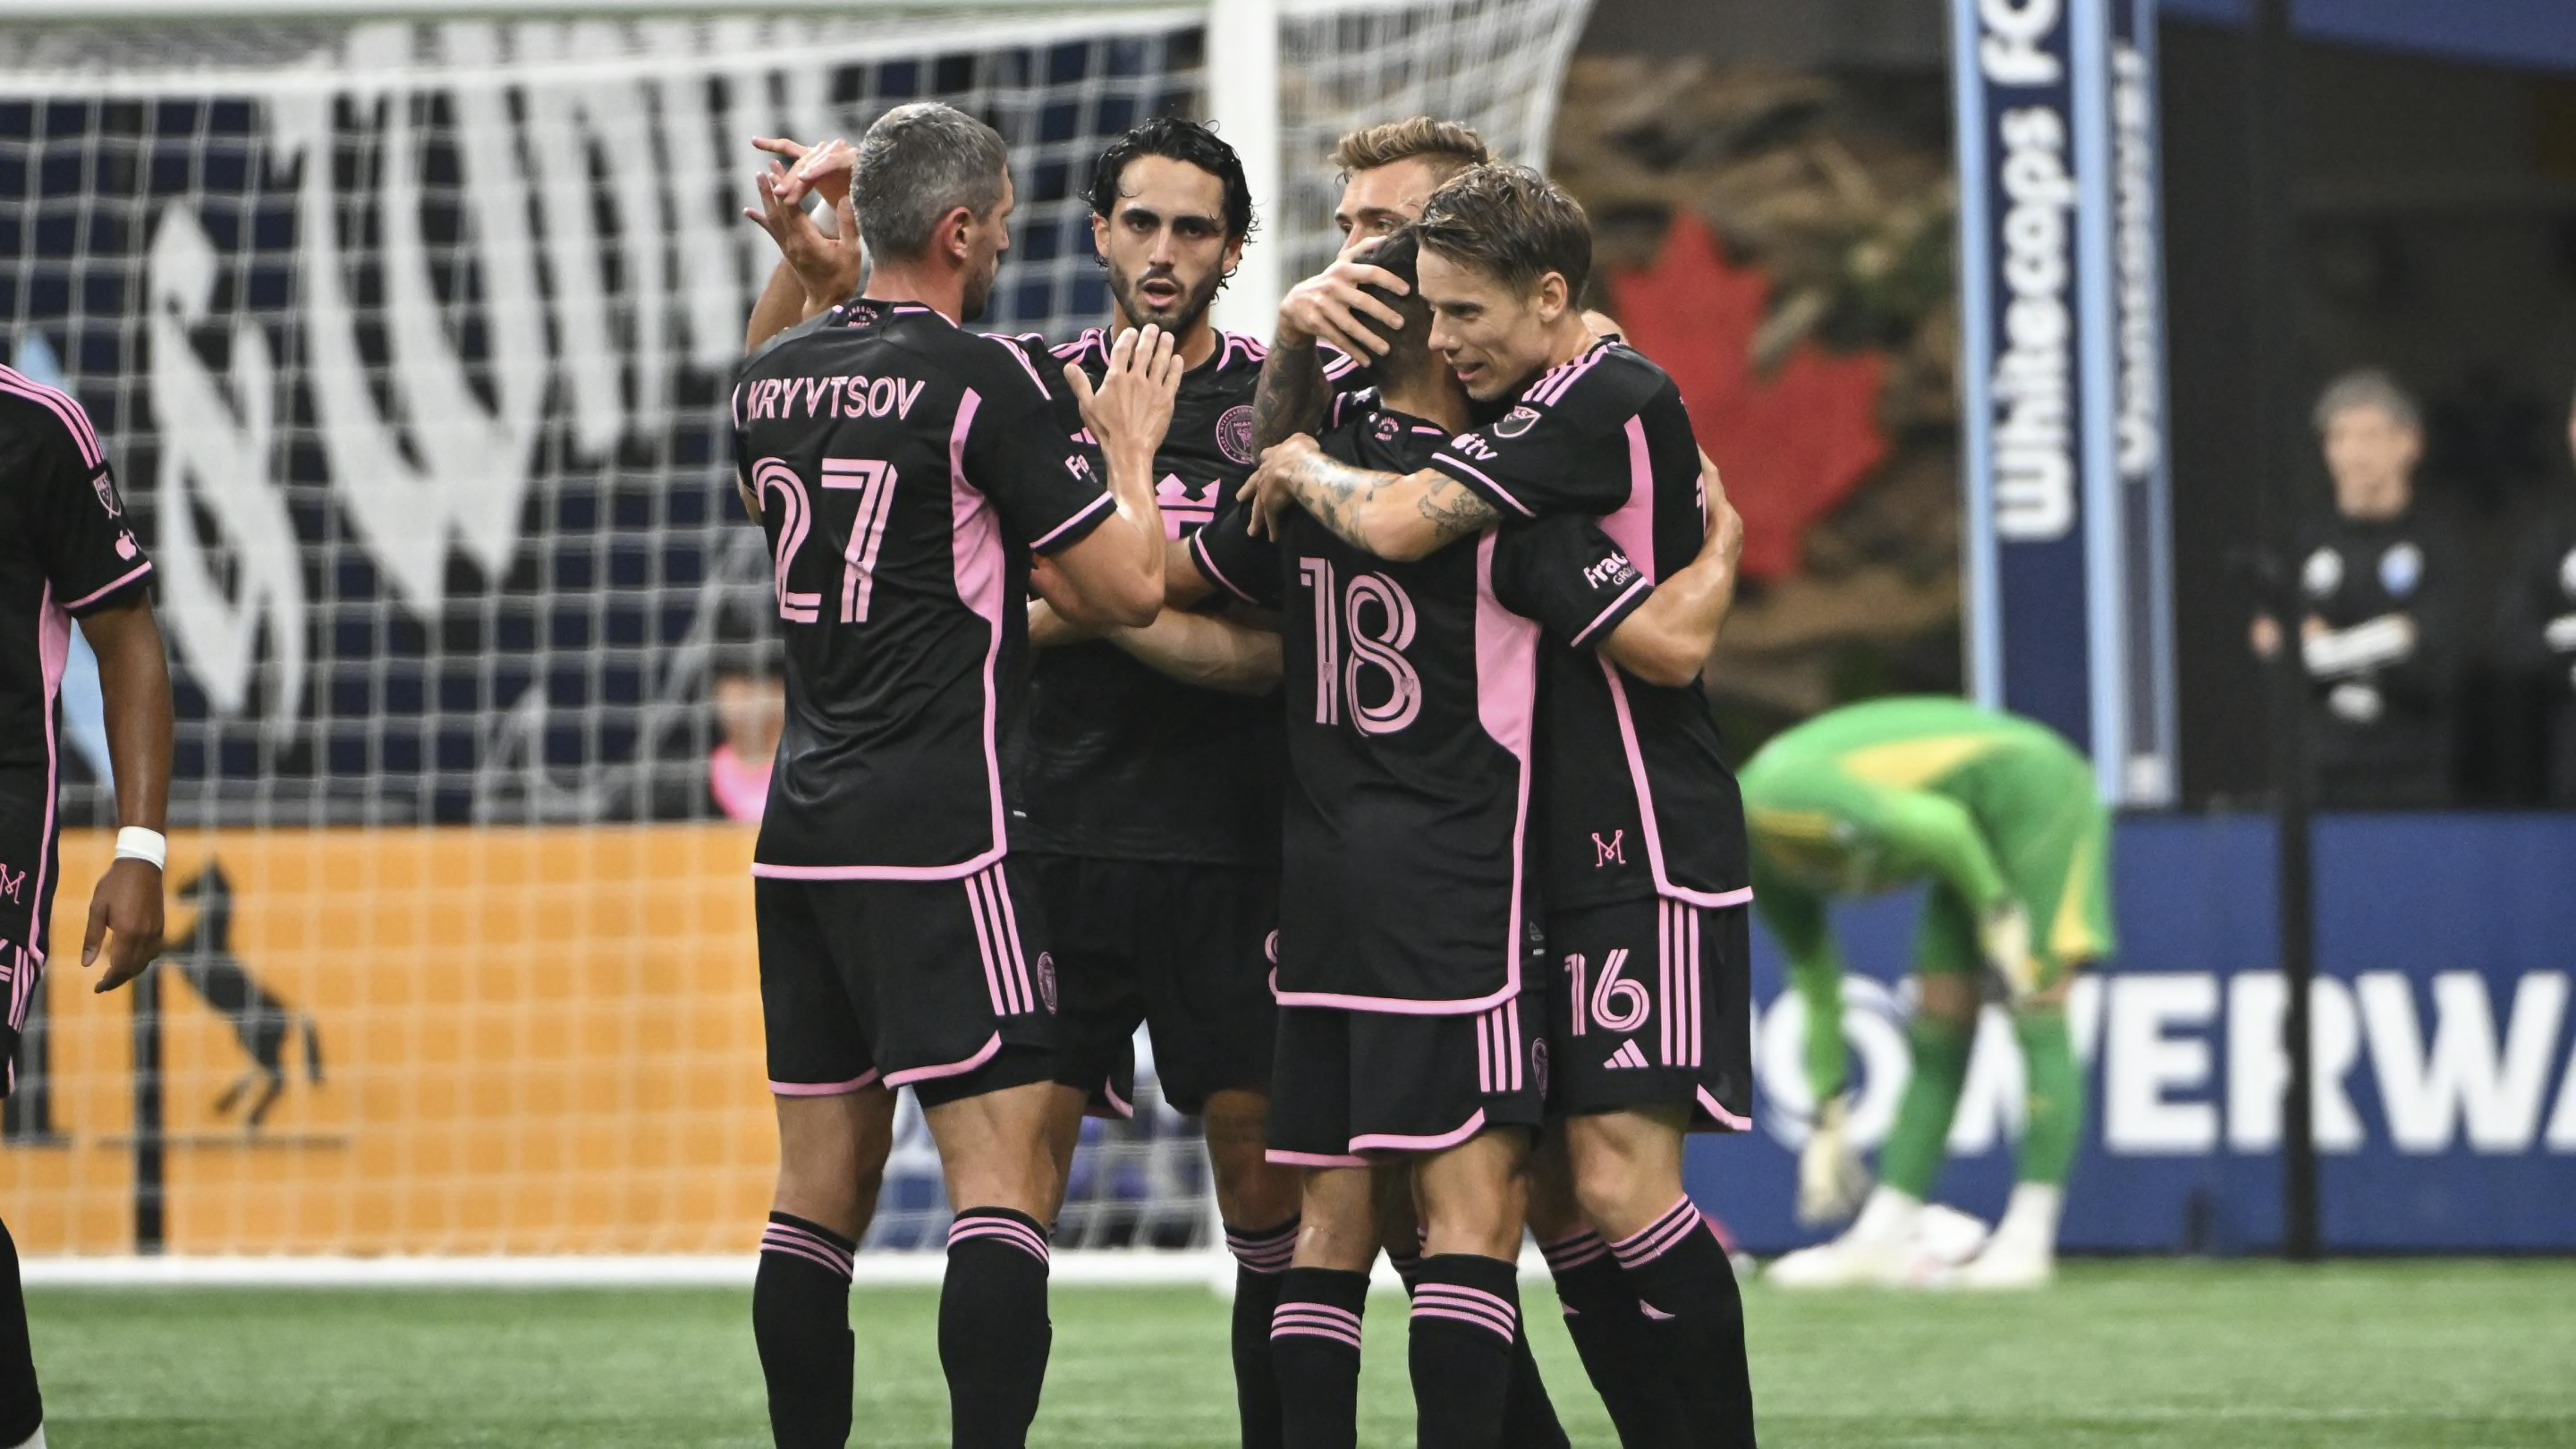 Vancouver Whitecaps 1-2 Inter Miami: Player ratings as Robert Taylor shines for the Herons